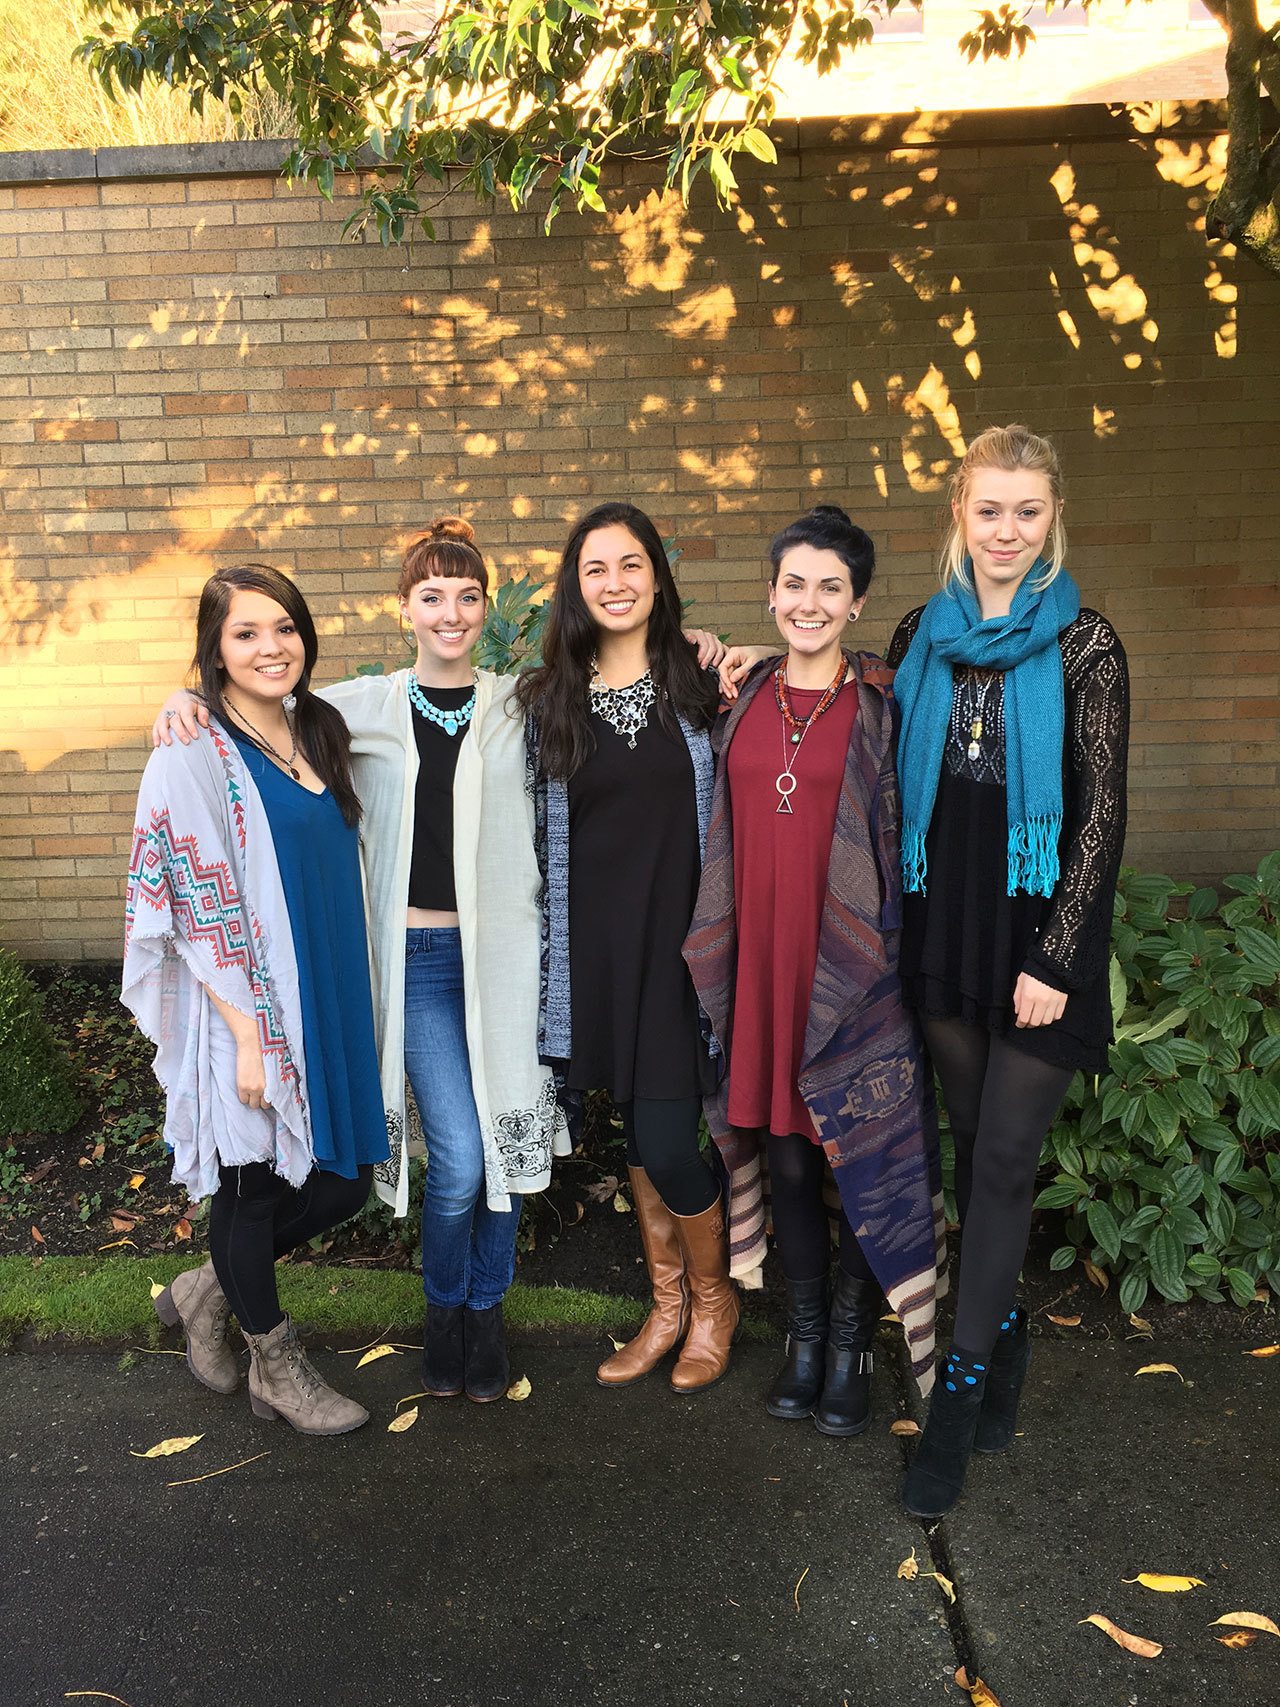 Members of the Se-lyn Boutique team pose for a picture. The store opens Dec. 3 on Main Street in Bothell. Contributed photo